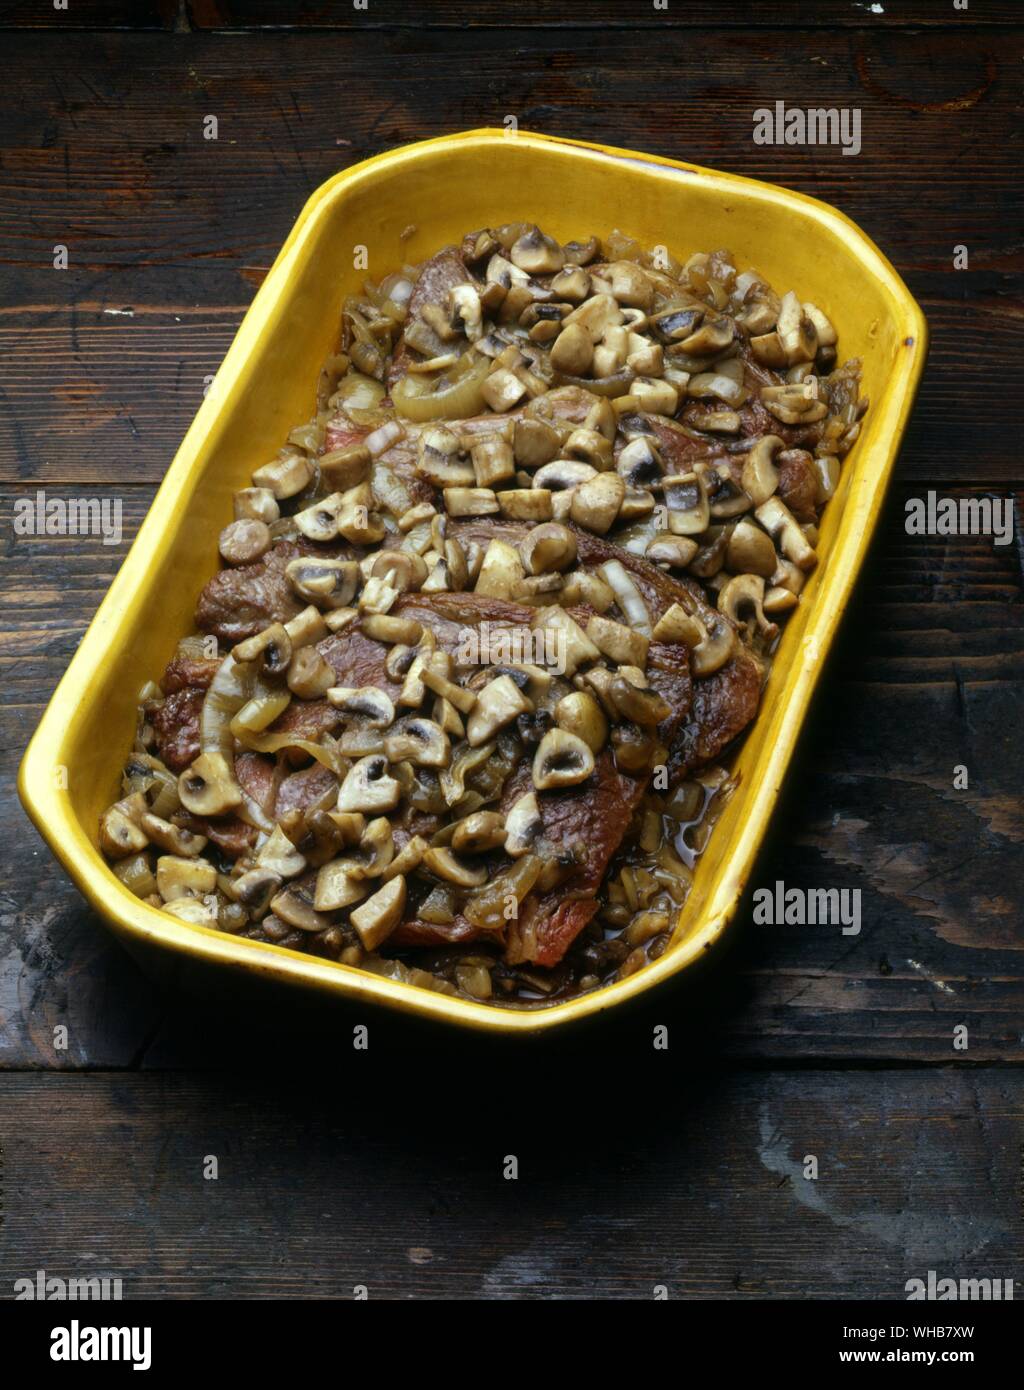 Mushrooms onions and chops in a dish. Stock Photo